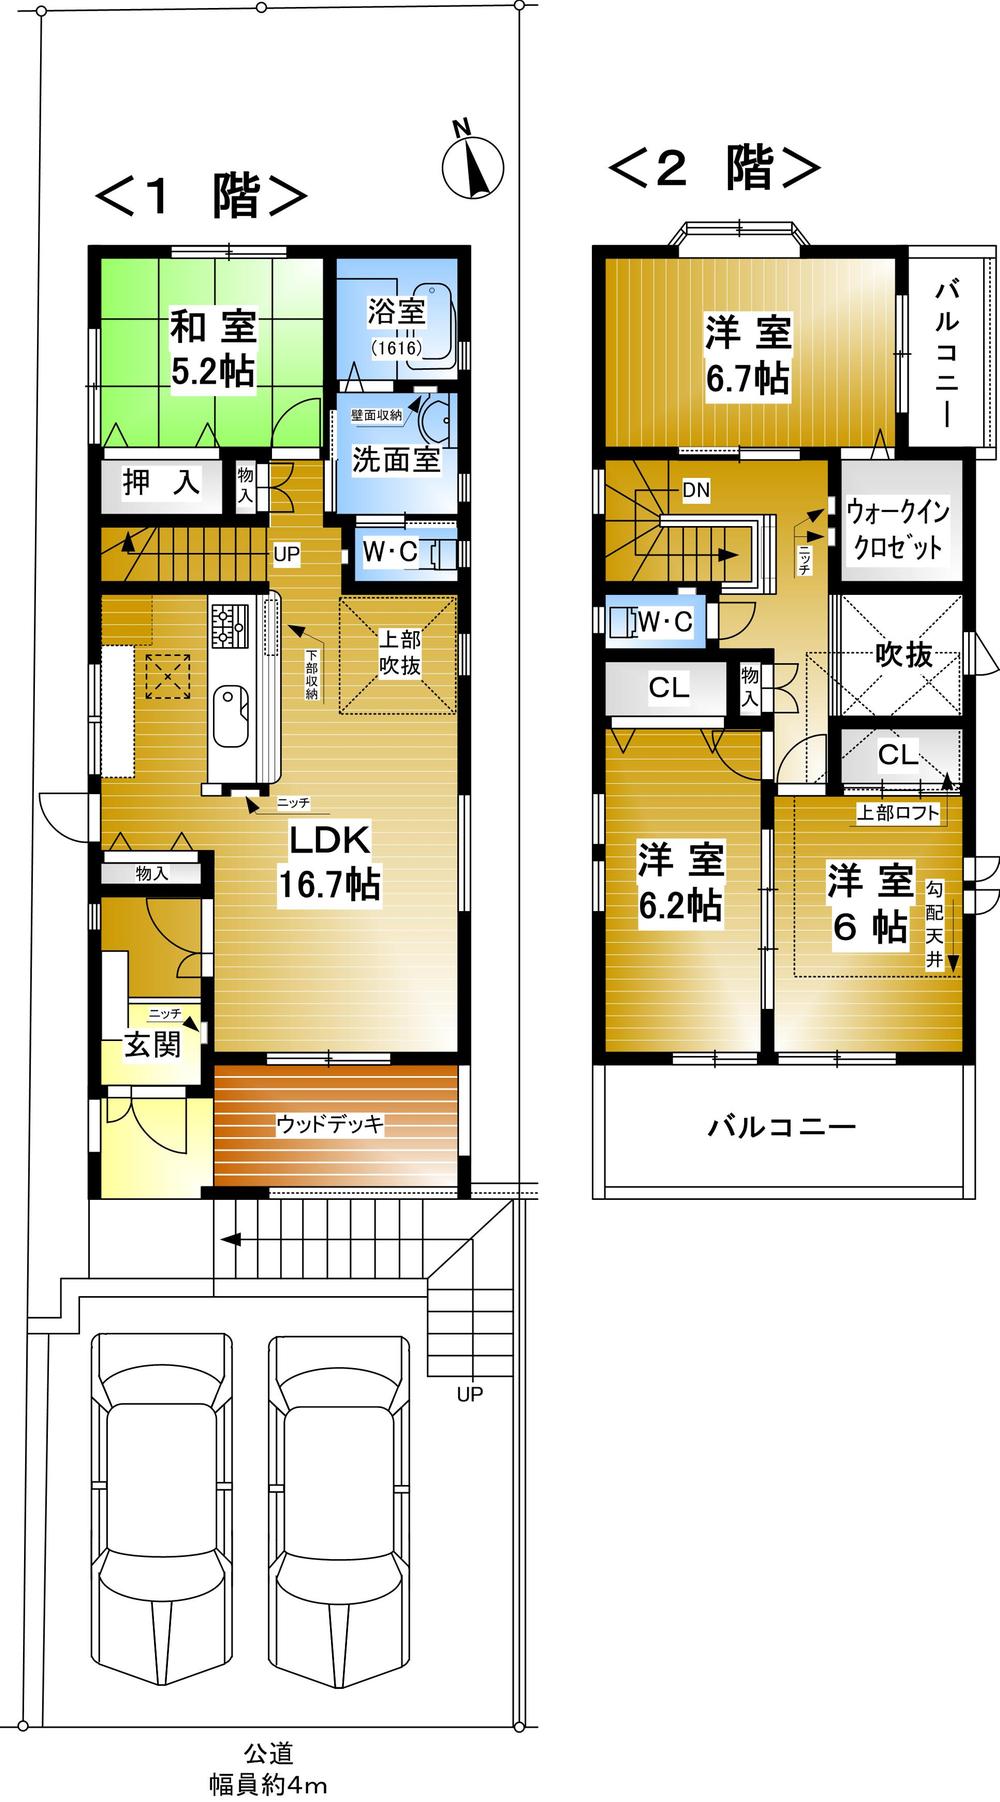 Floor plan. 30,800,000 yen, 4LDK, Land area 151.29 sq m , Building area 101.92 sq m   ■ Inner wooden deck facing the living room  ■ Bright atrium space in LDK top  ■ Large walk-in closet on the second floor north side Western-style, To the south Western-style about 2.5 Pledge of loft